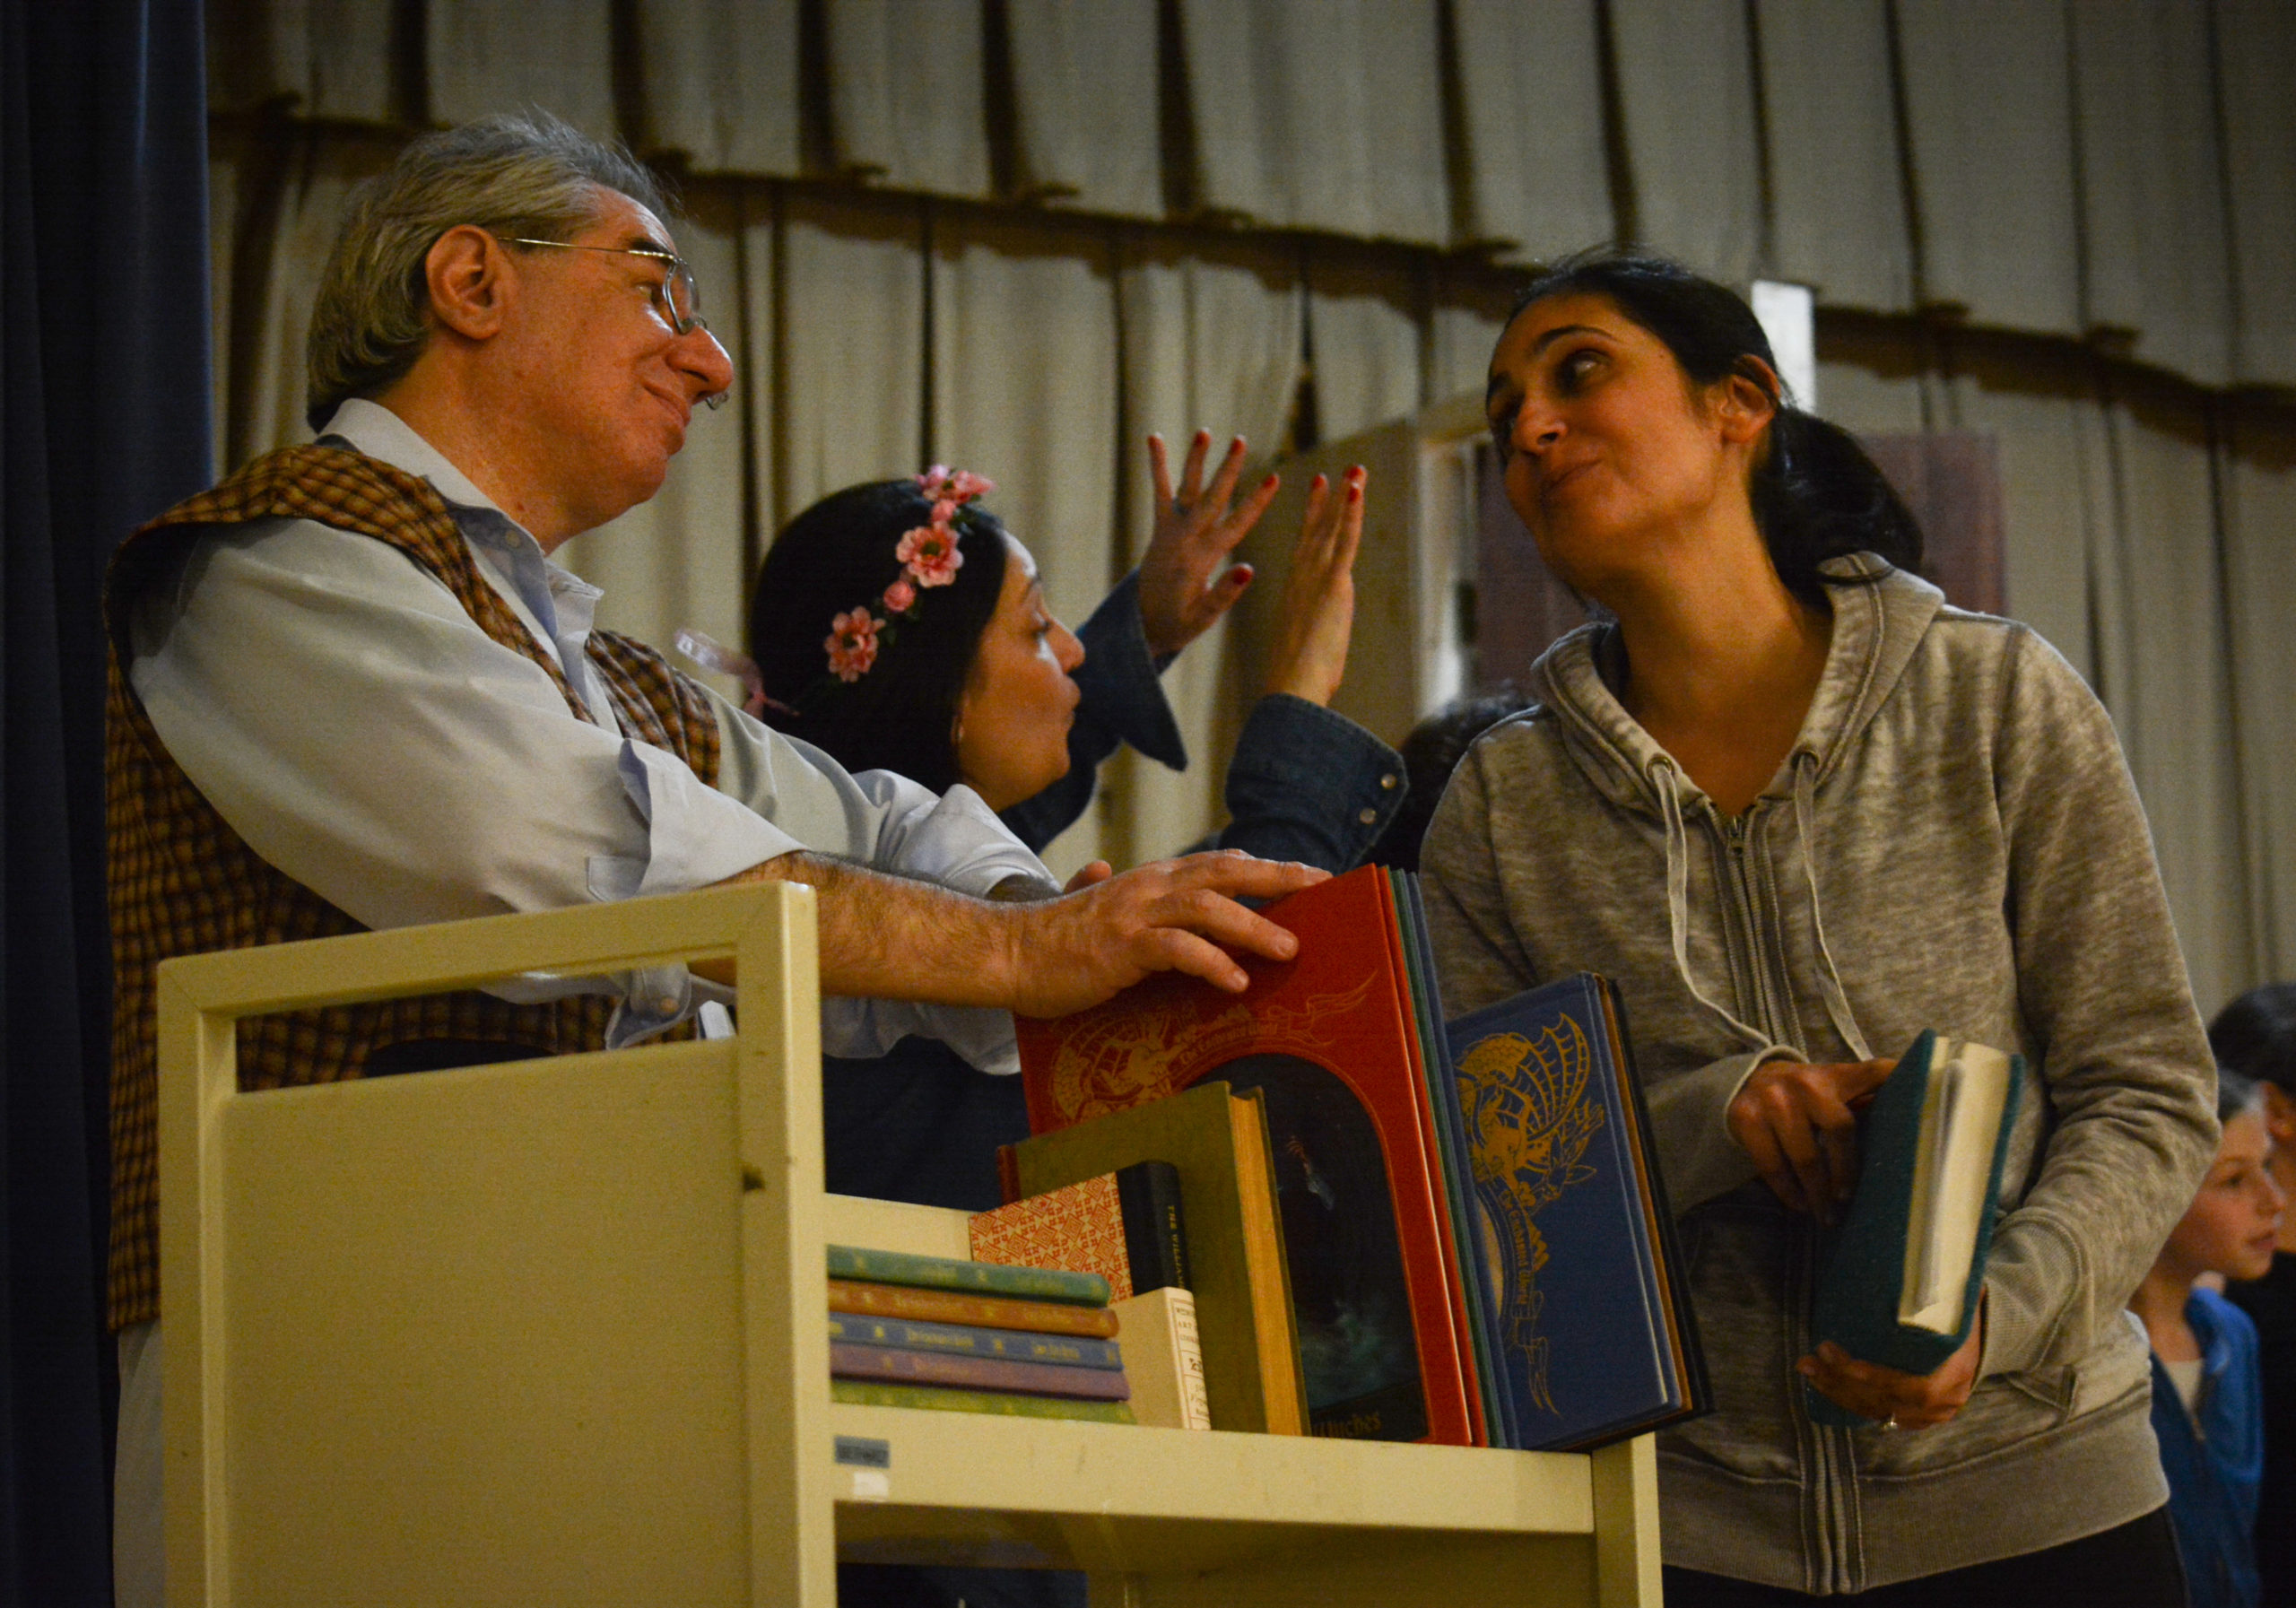 Lillian Rokhsar and Robert Aizer, rehearsing their respective roles of Belle and bookseller, will appear in Temple Israel's upcoming performance of Beauty and the Beast. (Photo by Janelle Clausen)